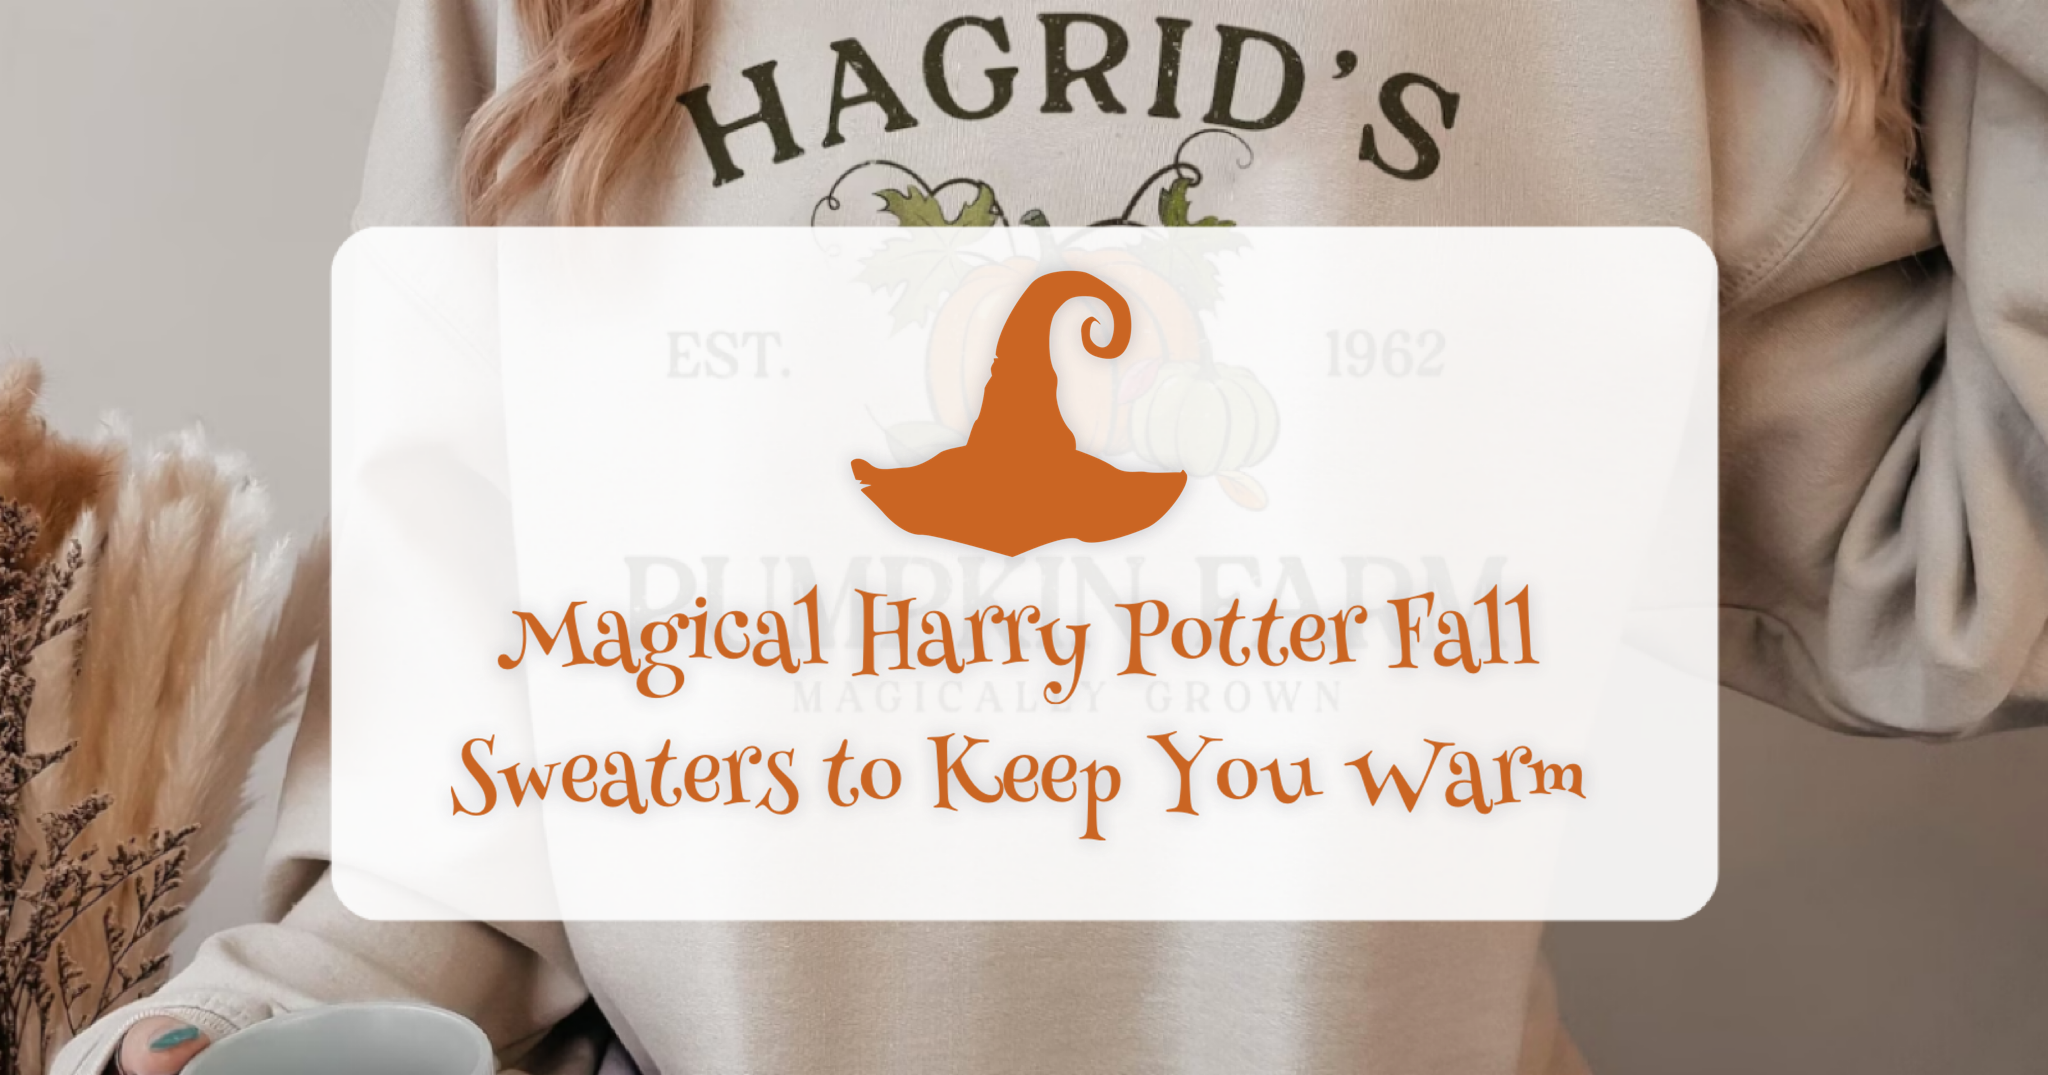 Magical Harry Potter Fall Sweaters to Keep You Warm